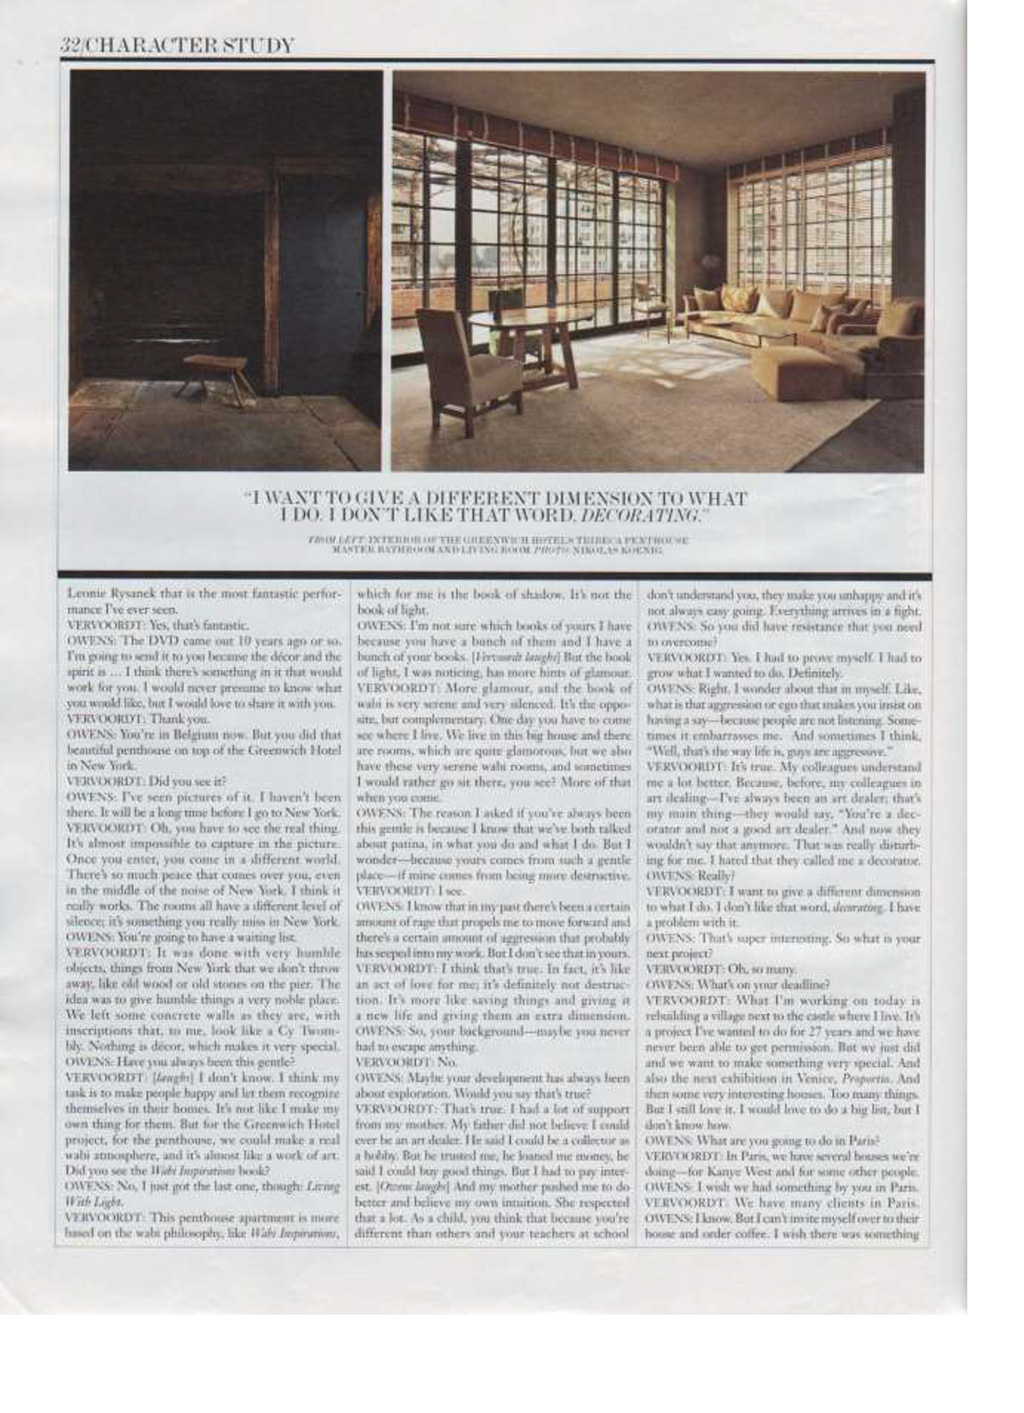 Interview Magazine sits down with Axel Vervoordt, the interior designer behind our Tribeca Penthouse